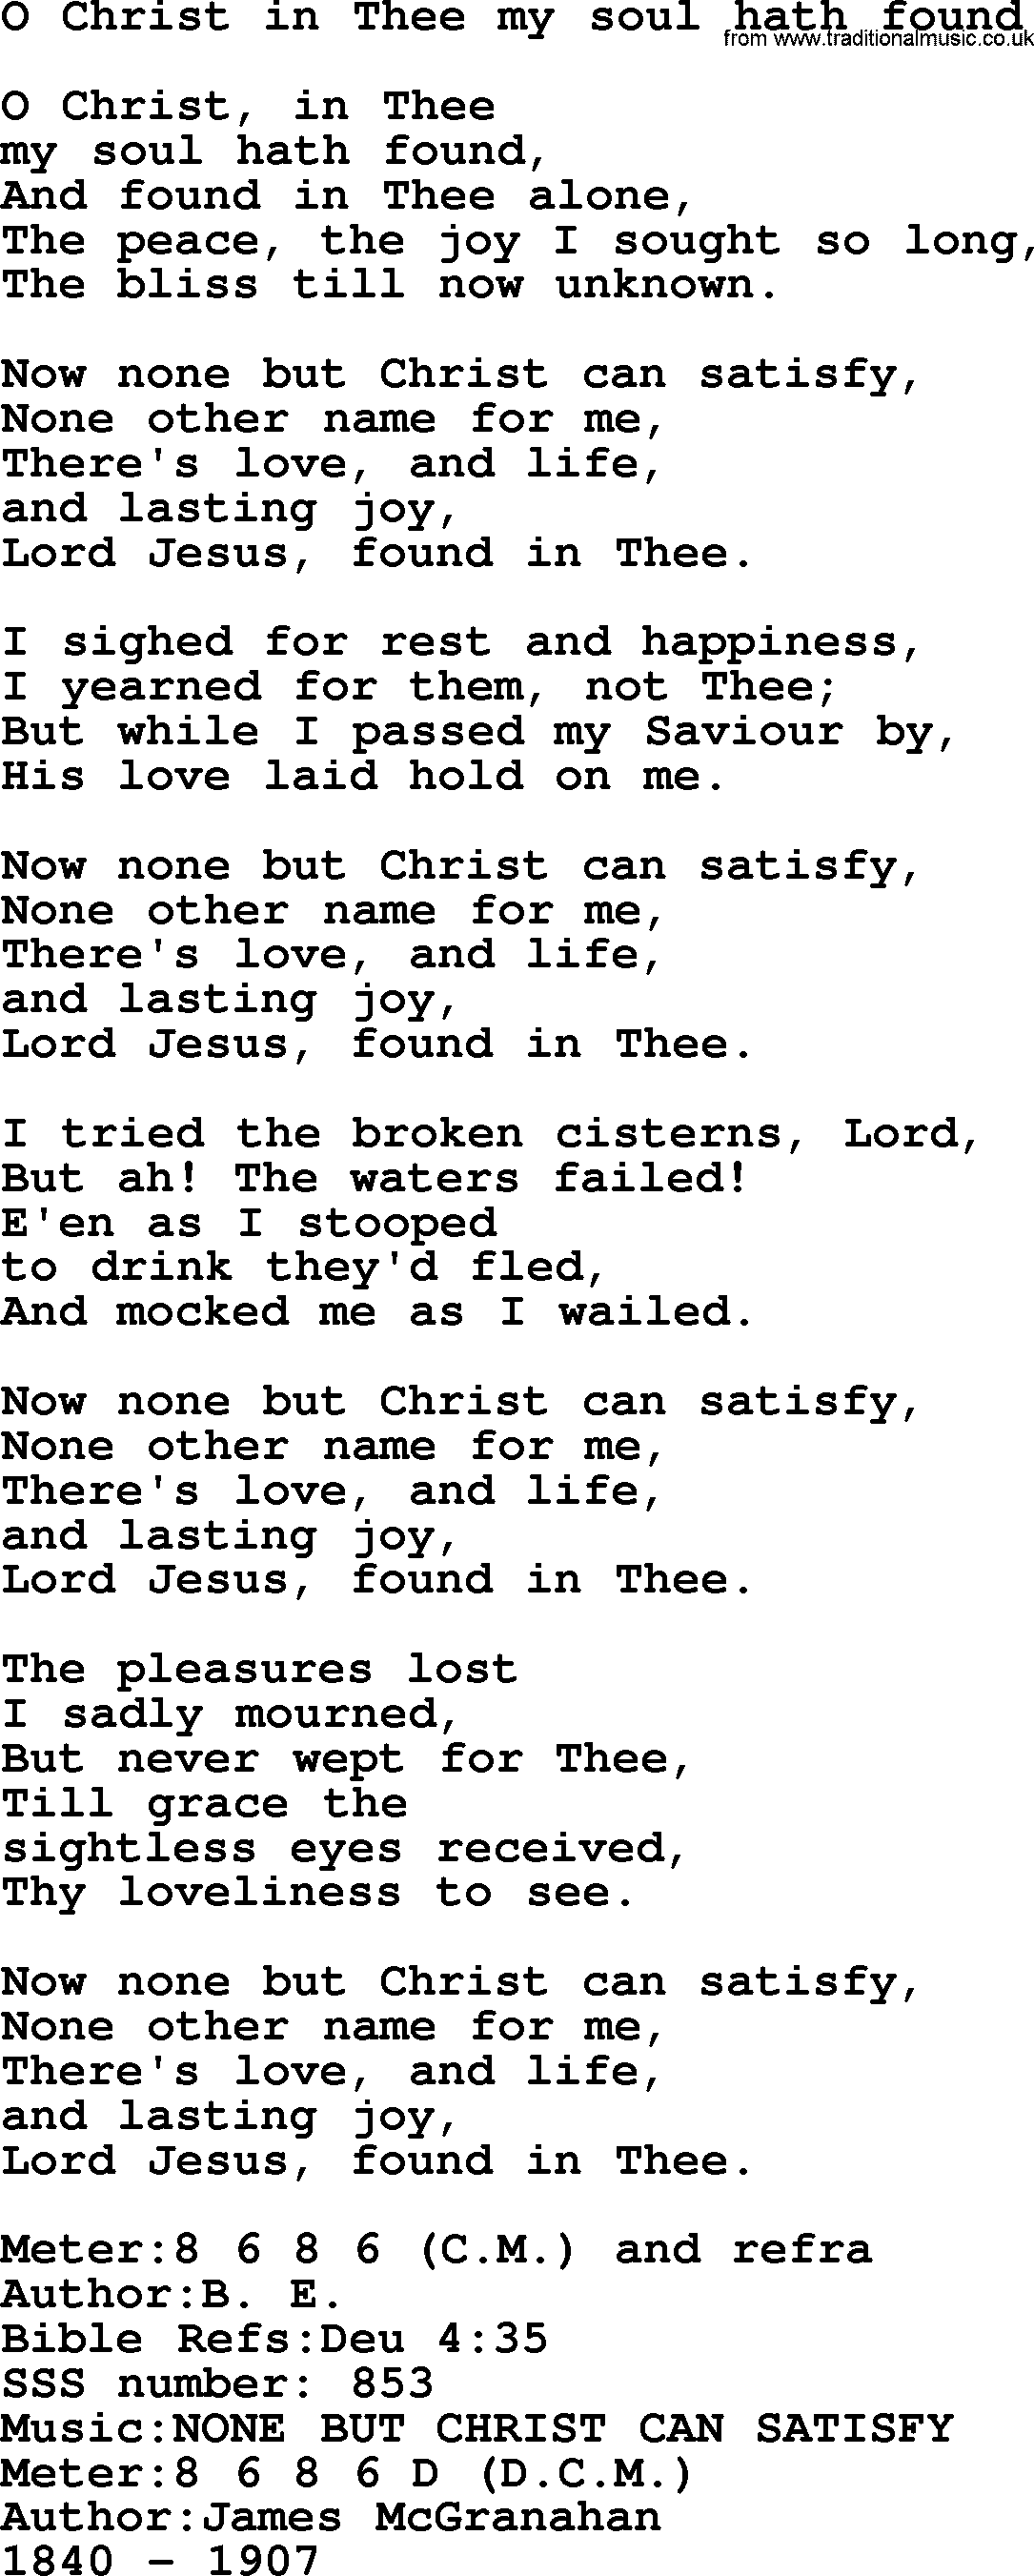 Sacred Songs and Solos complete, 1200 Hymns, title: O Christ In Thee My Soul Hath Found, lyrics and PDF